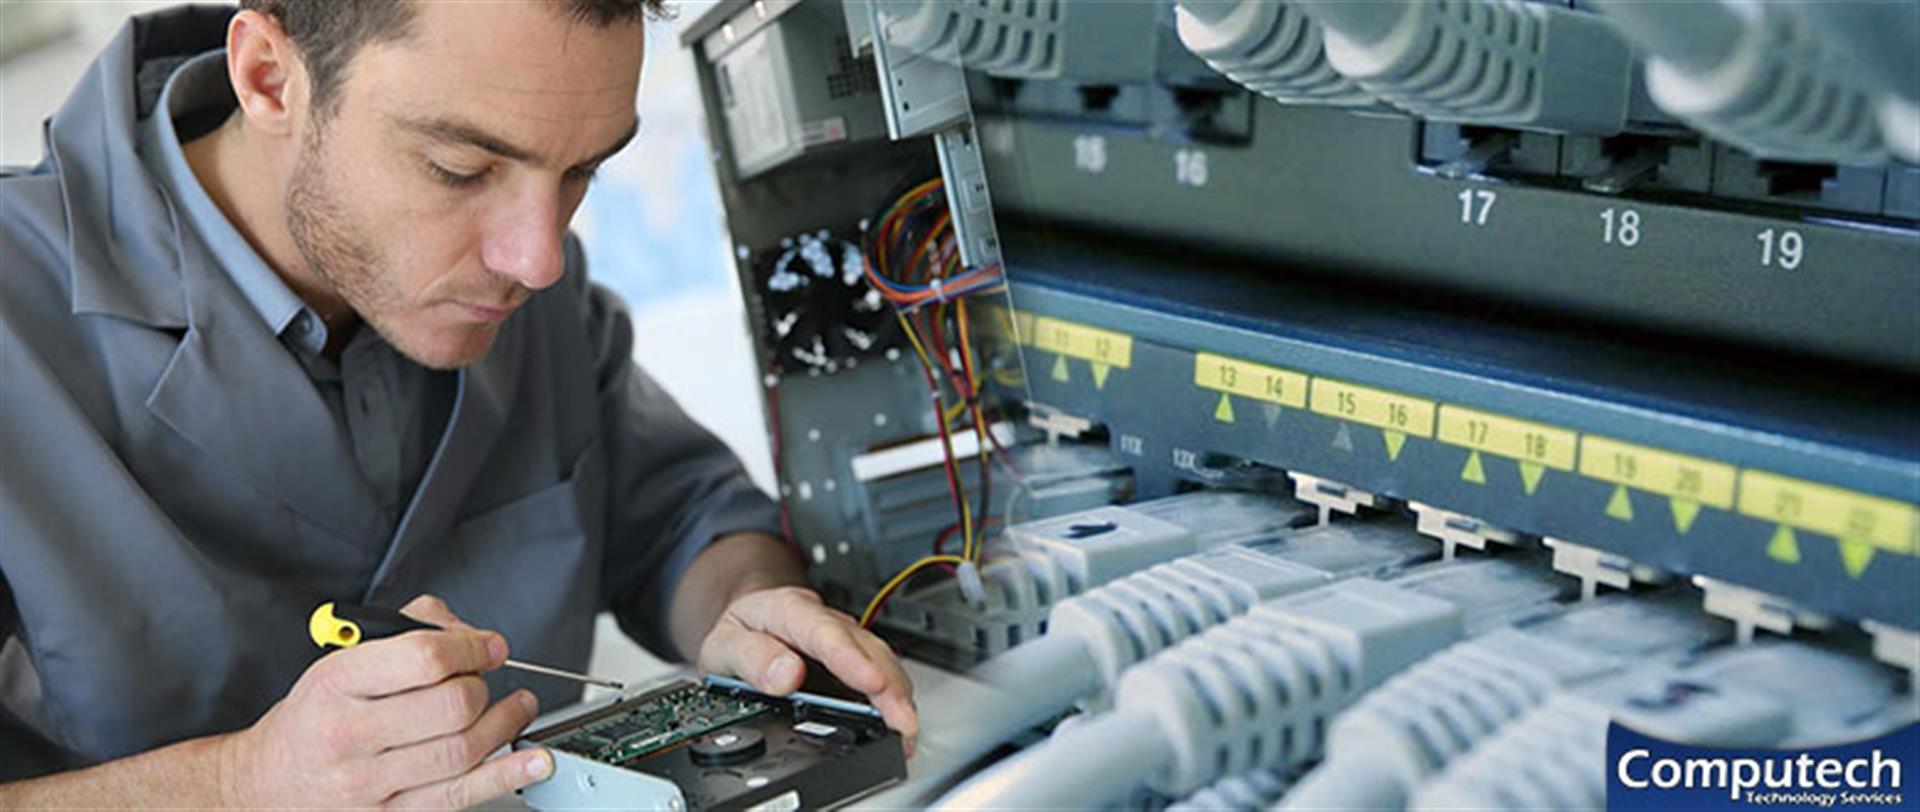 Maricopa Arizona Onsite Computer PC & Printer Repair, Networks, Telecom Voice and Data Low Voltage Cabling Solutions